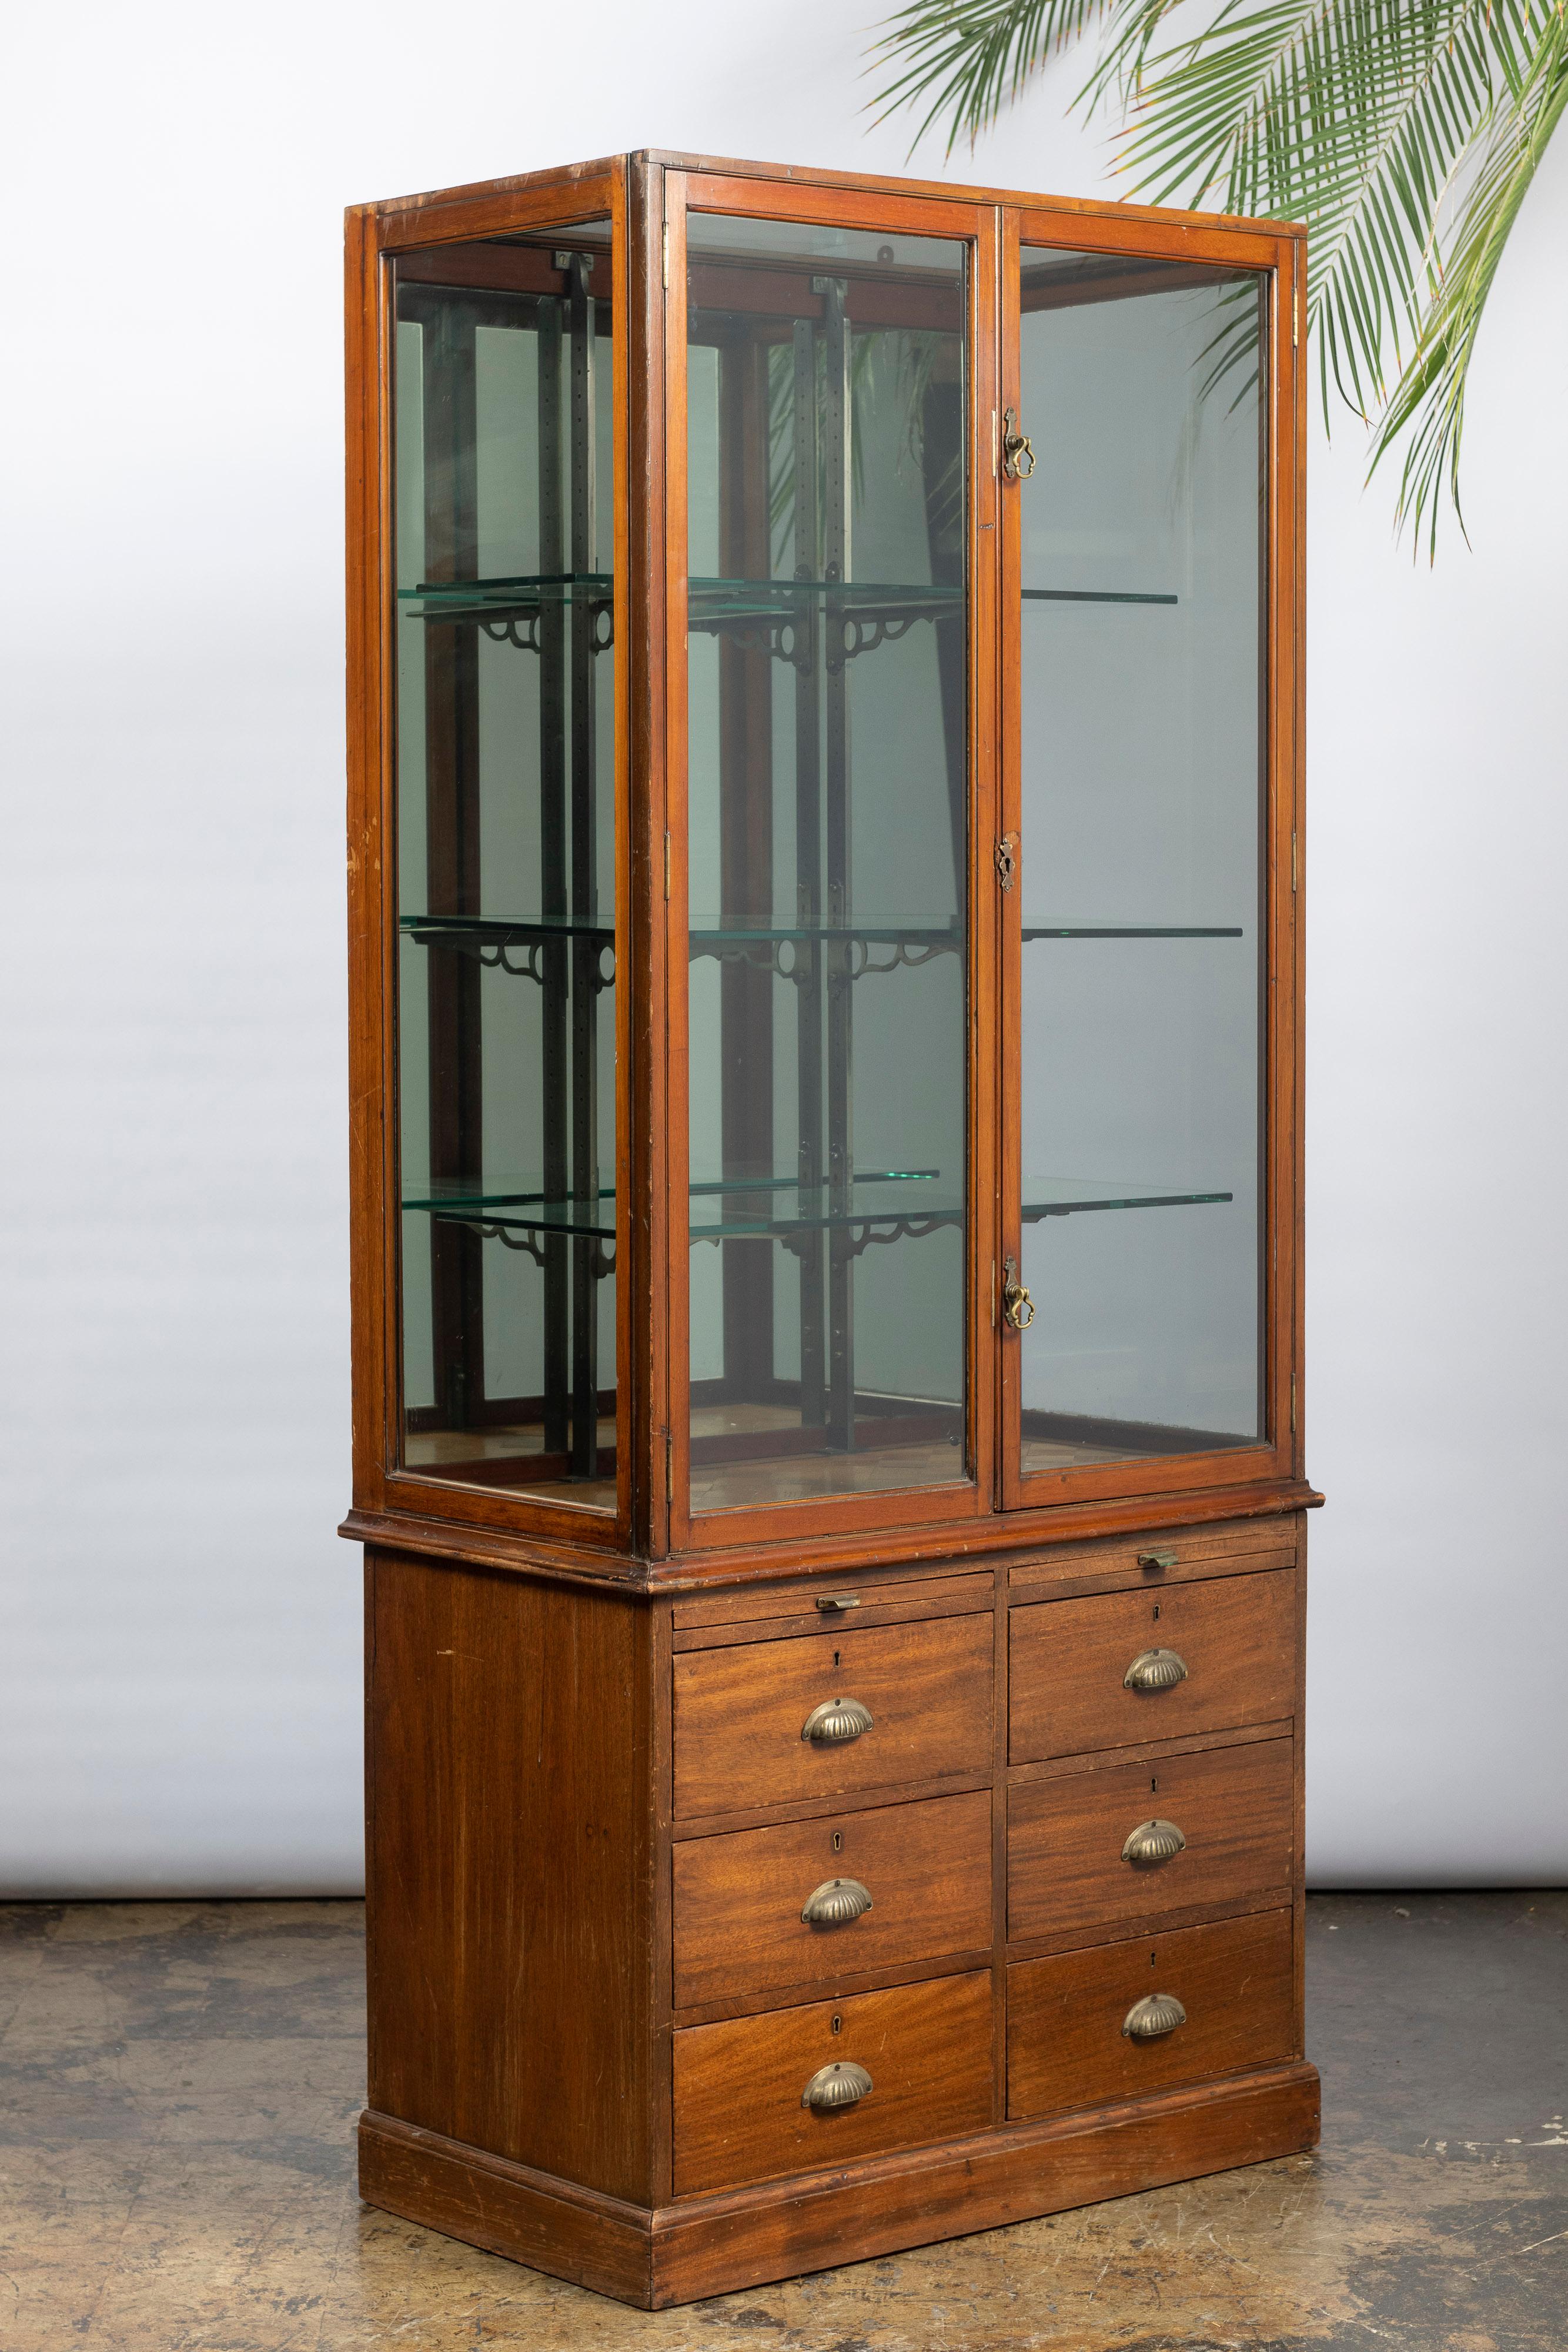 Cut Glass Antique English Haberdashery or Apothecary Cabinet, with Wood and Glass For Sale